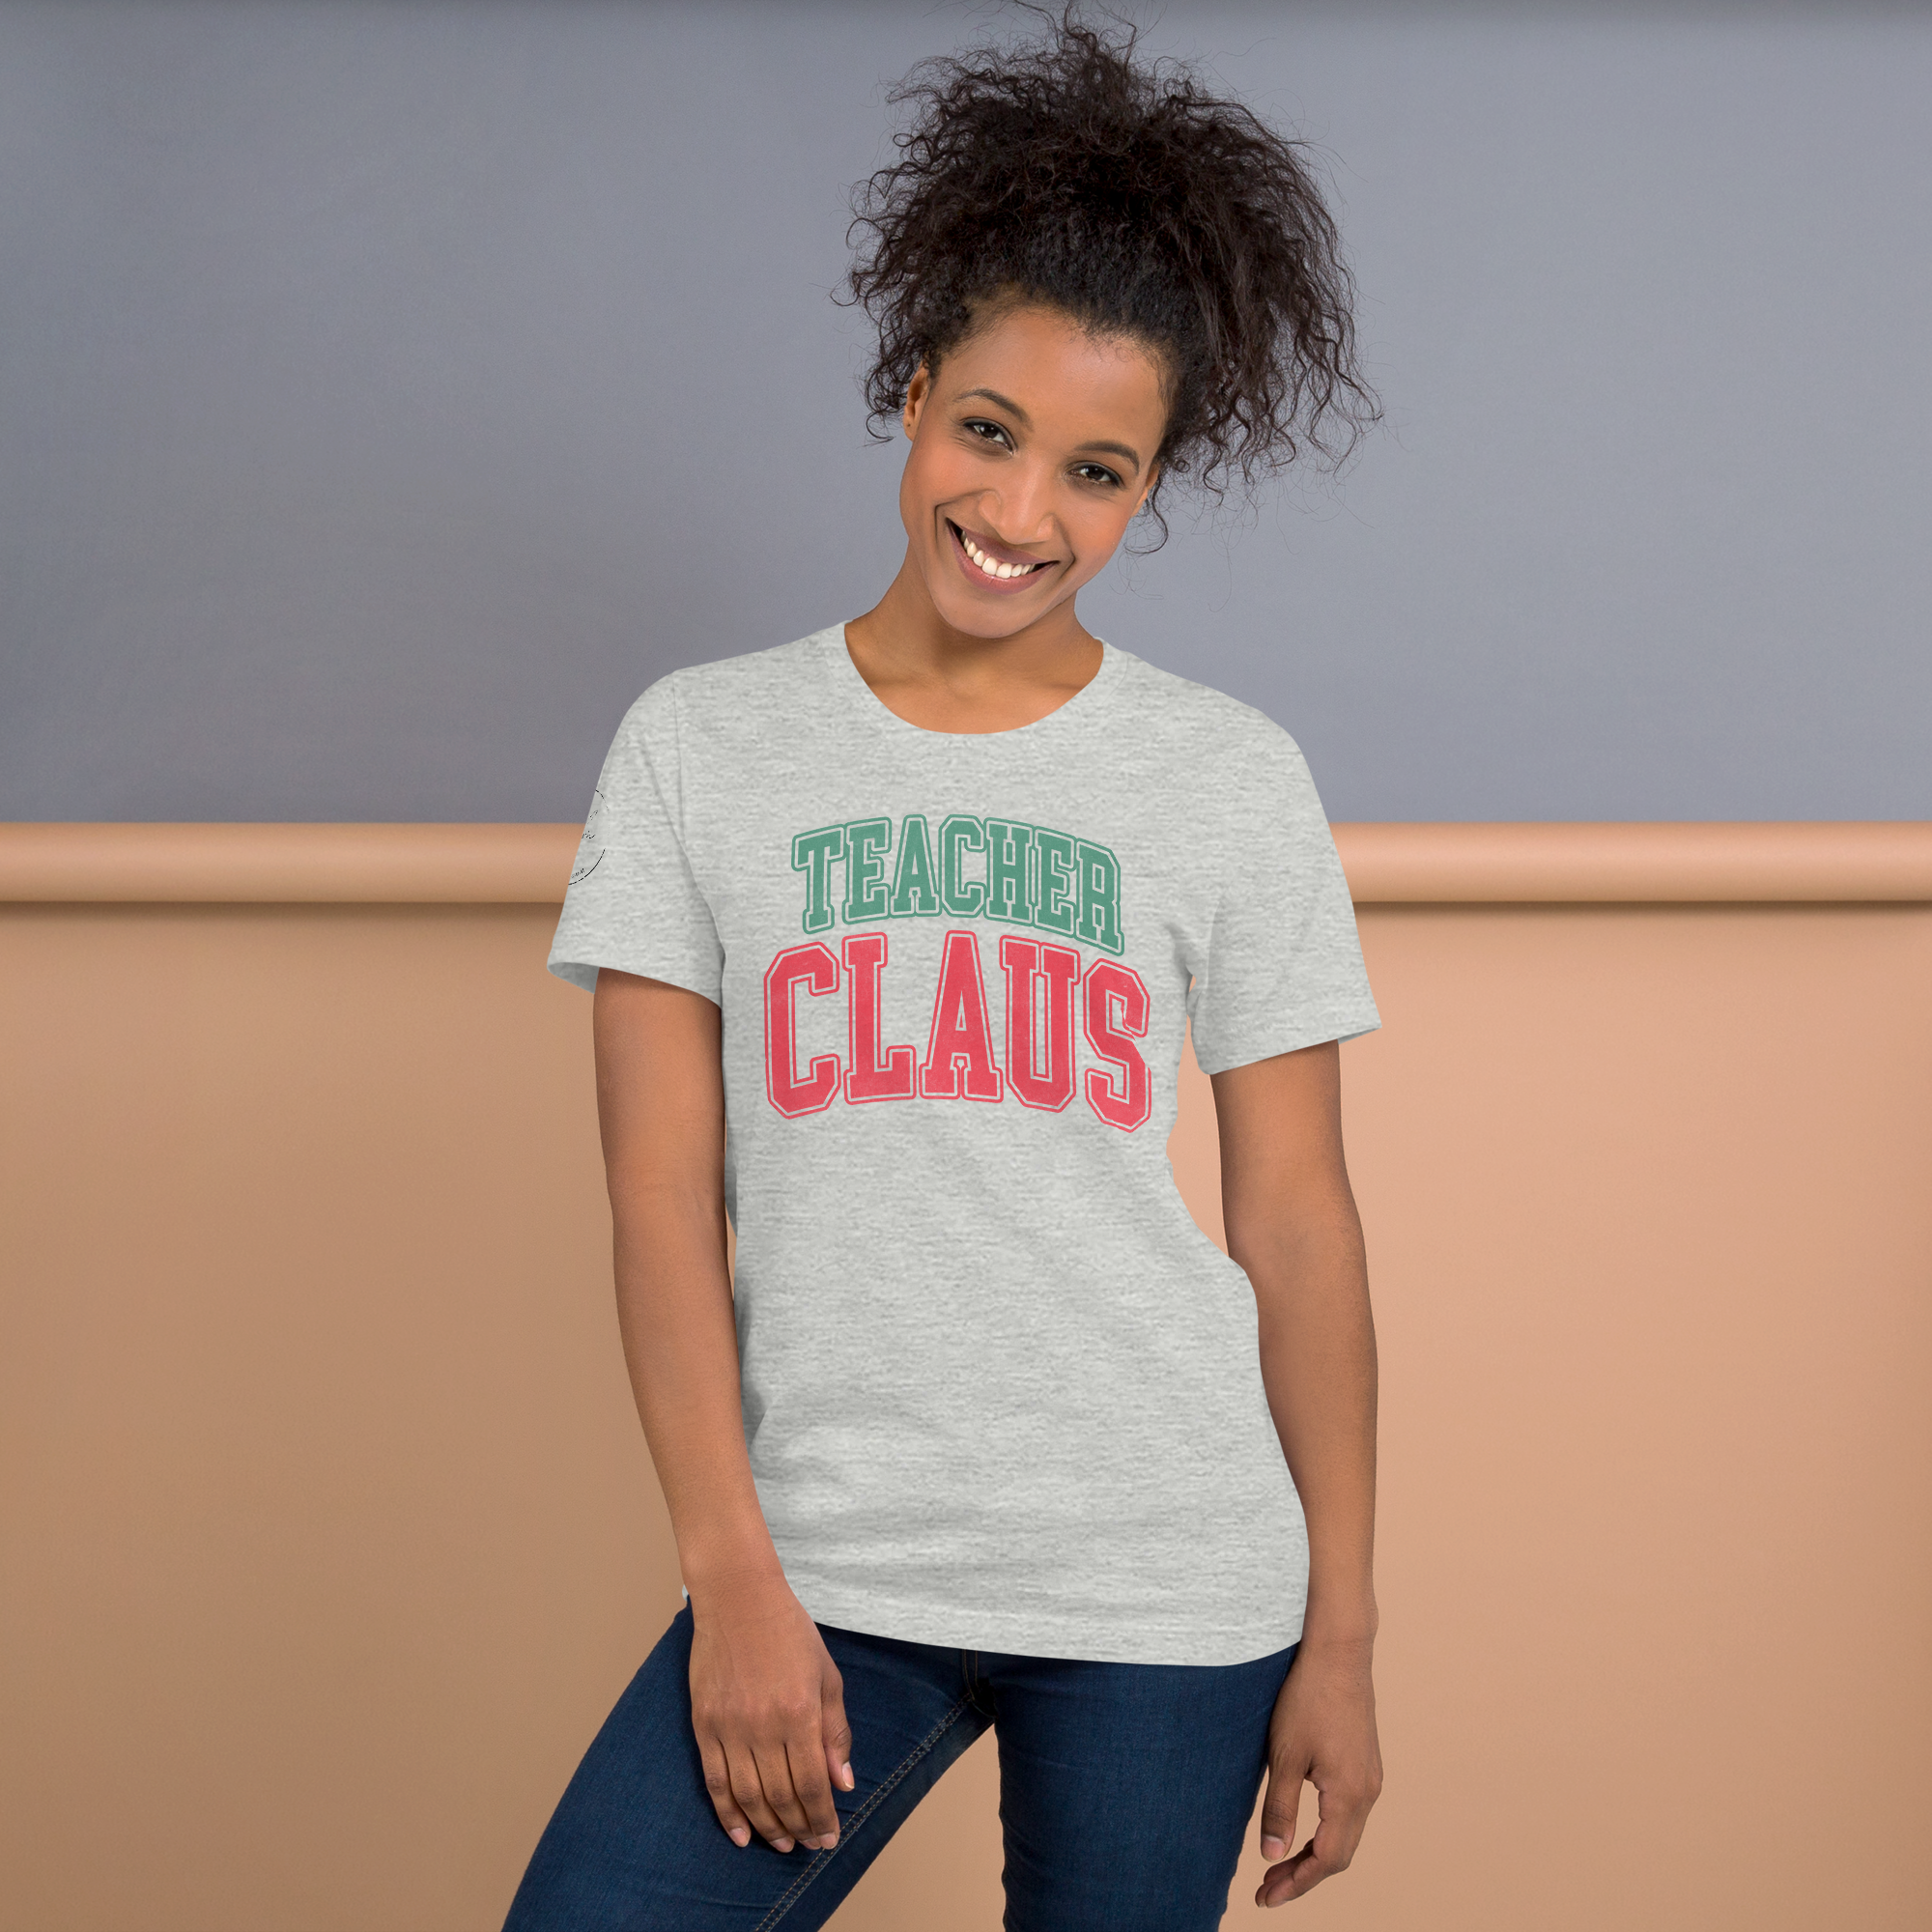 TEACHER CLAUS t-shirt comes in many colors